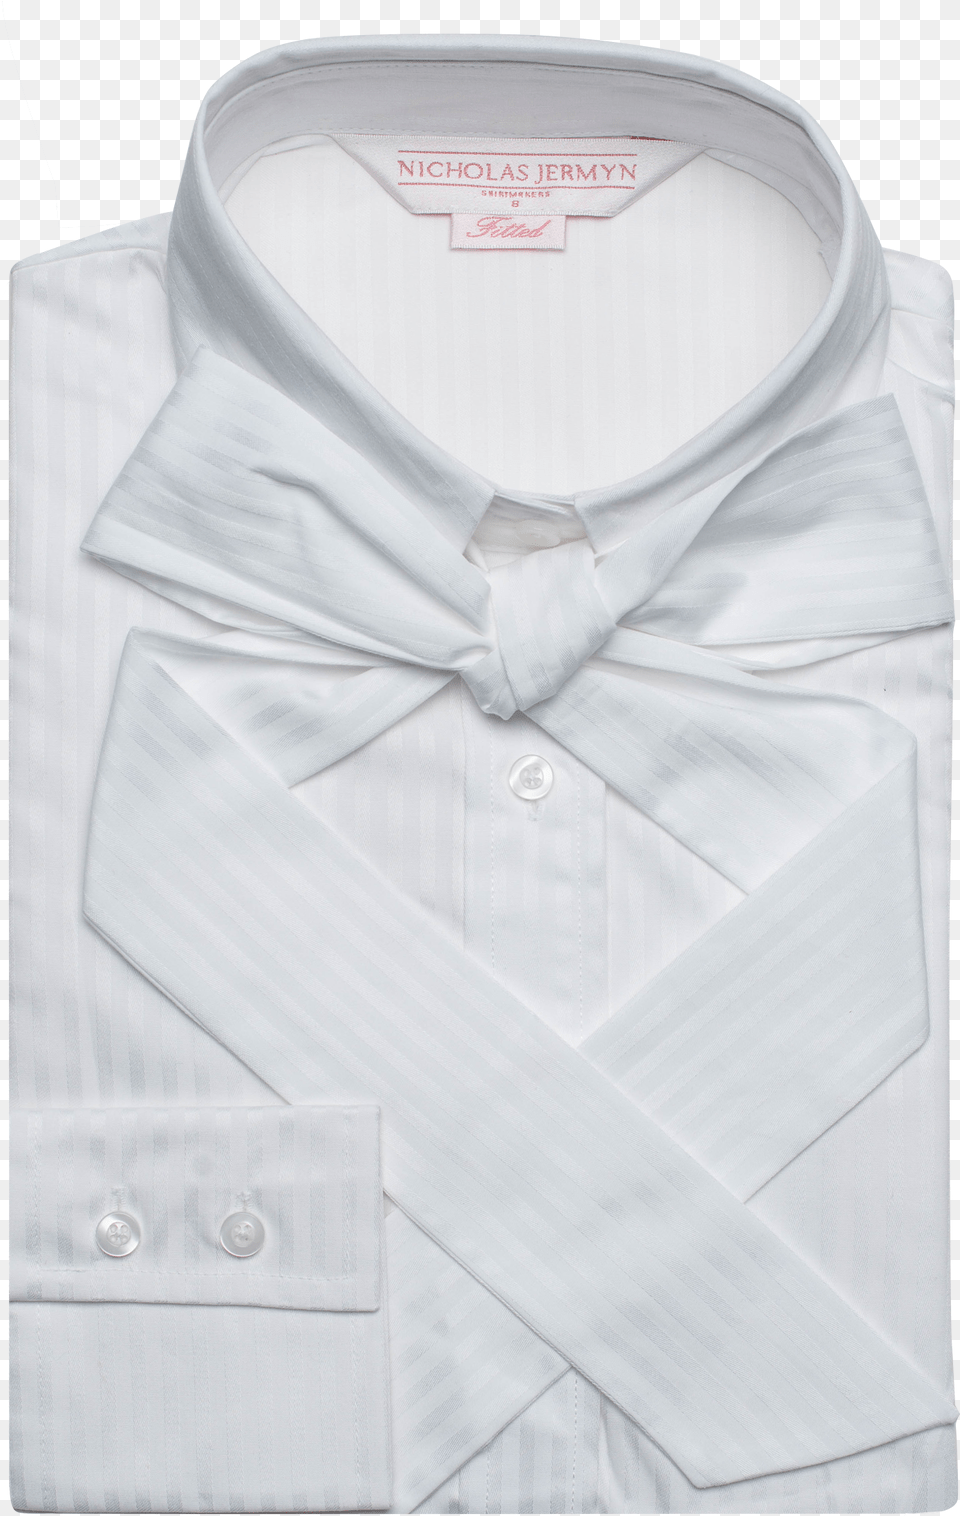 Touch To Zoom Formal Wear, Clothing, Dress Shirt, Shirt, Accessories Png